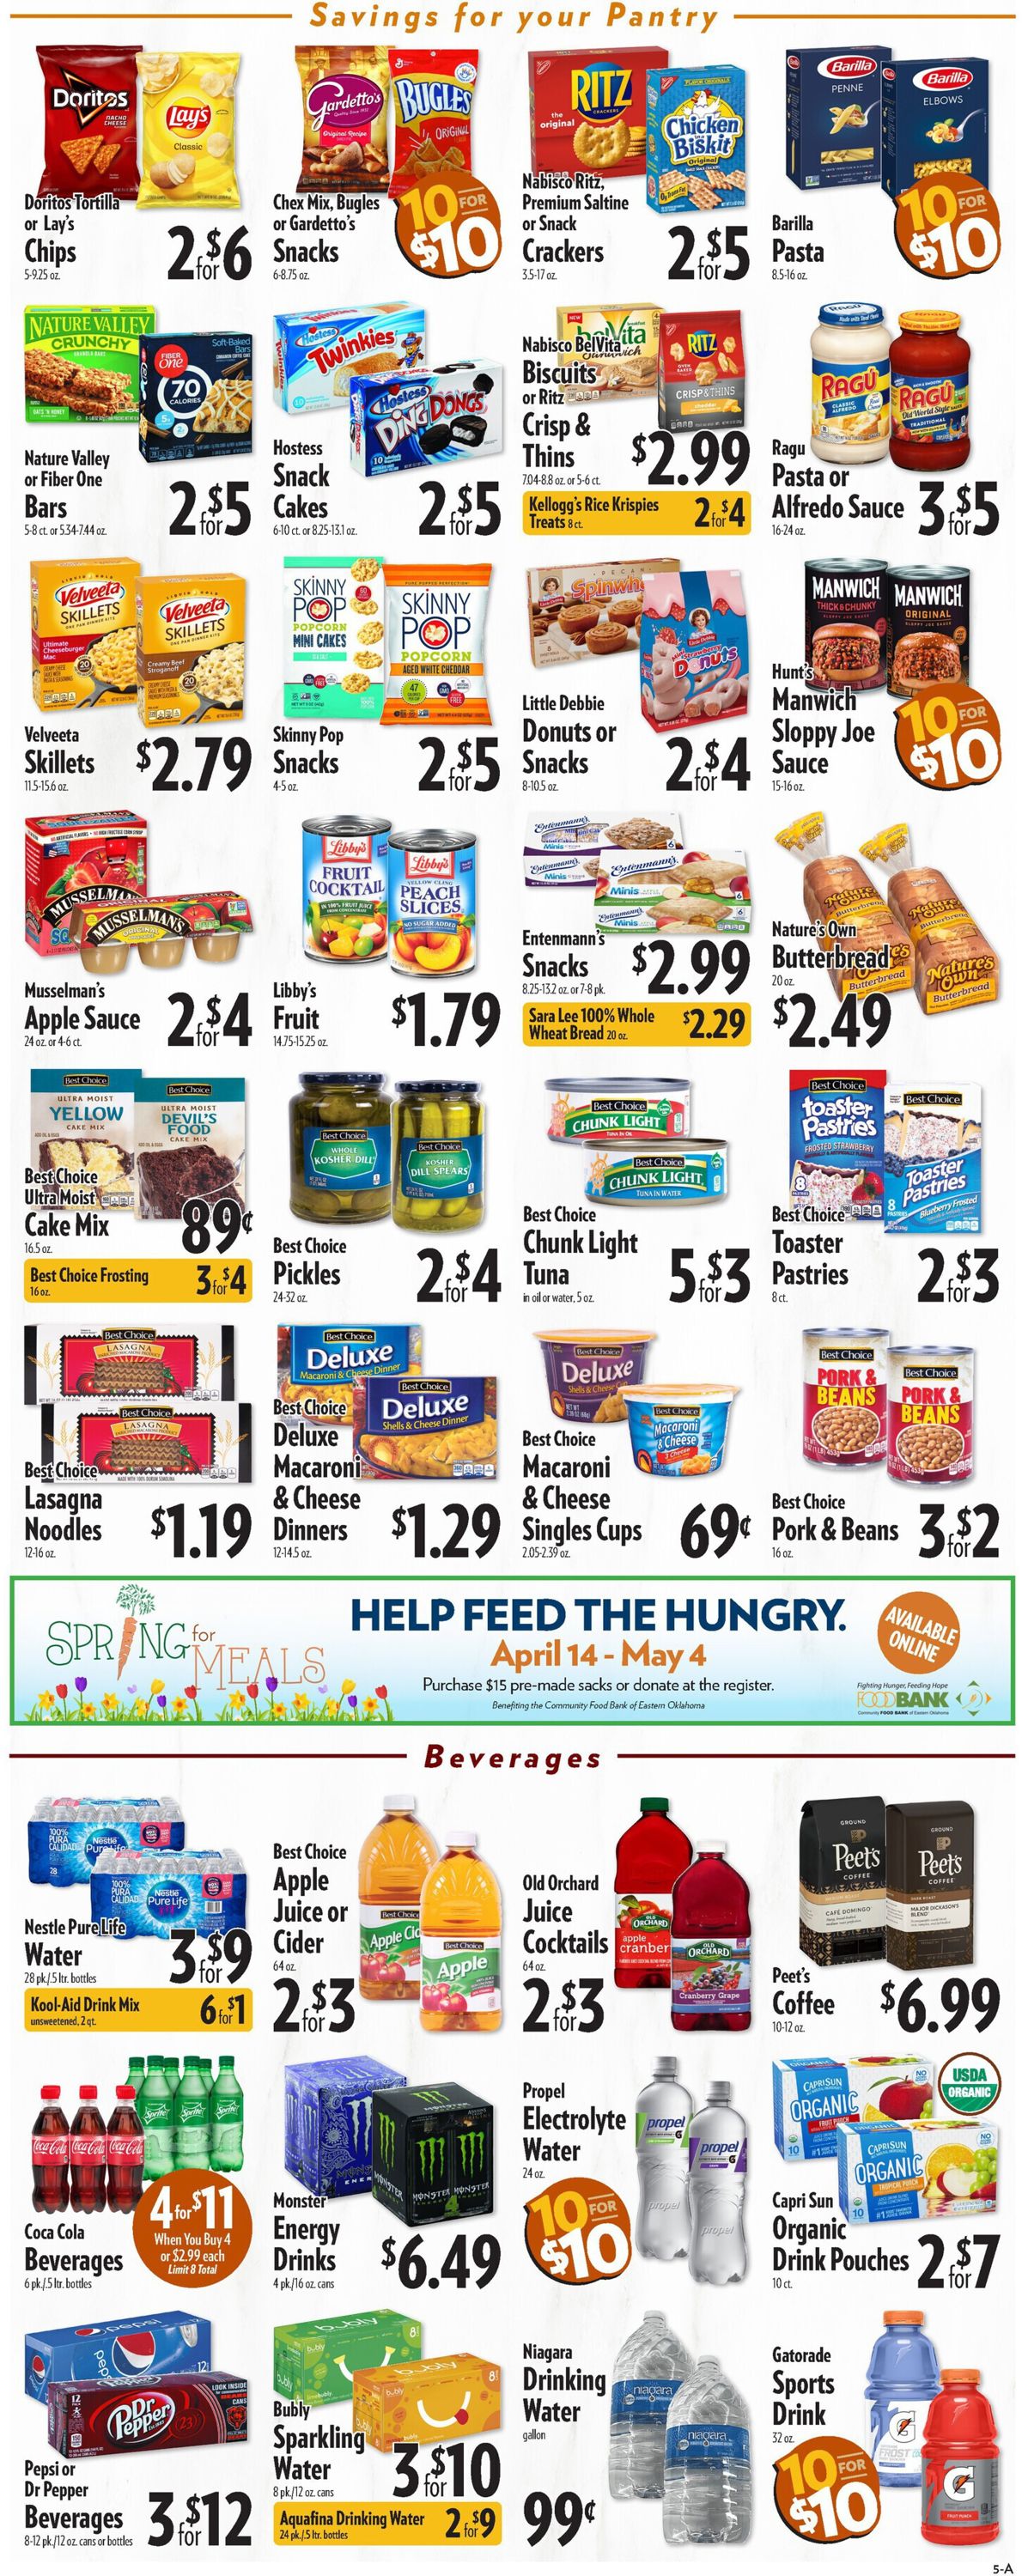 Reasor's Ad from 04/14/2021